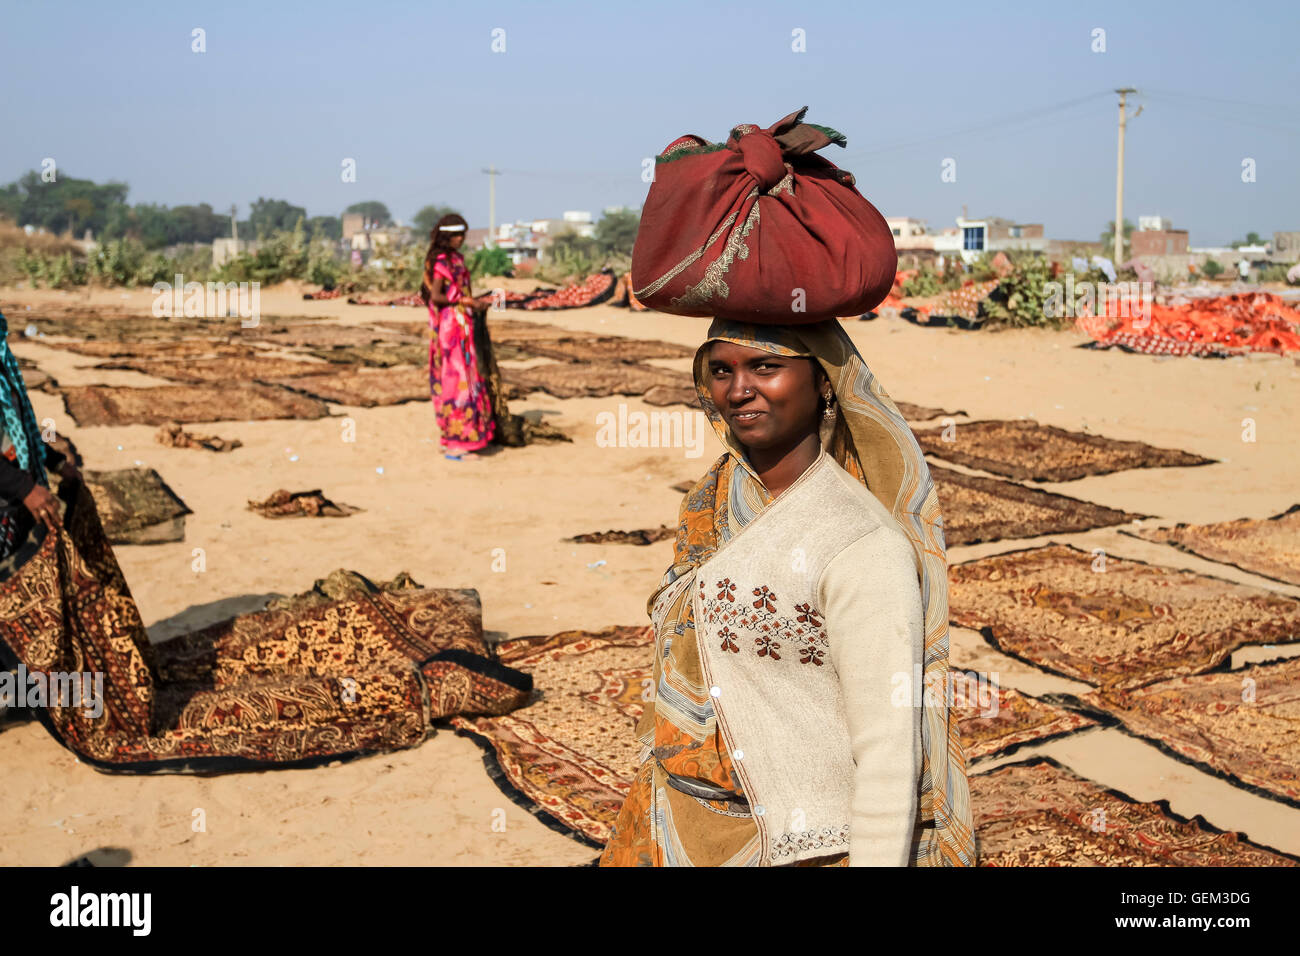 Sanganer, India - January 2013. A smiling Indian woman in a field full of block printed fabric drying in the sun. Stock Photo